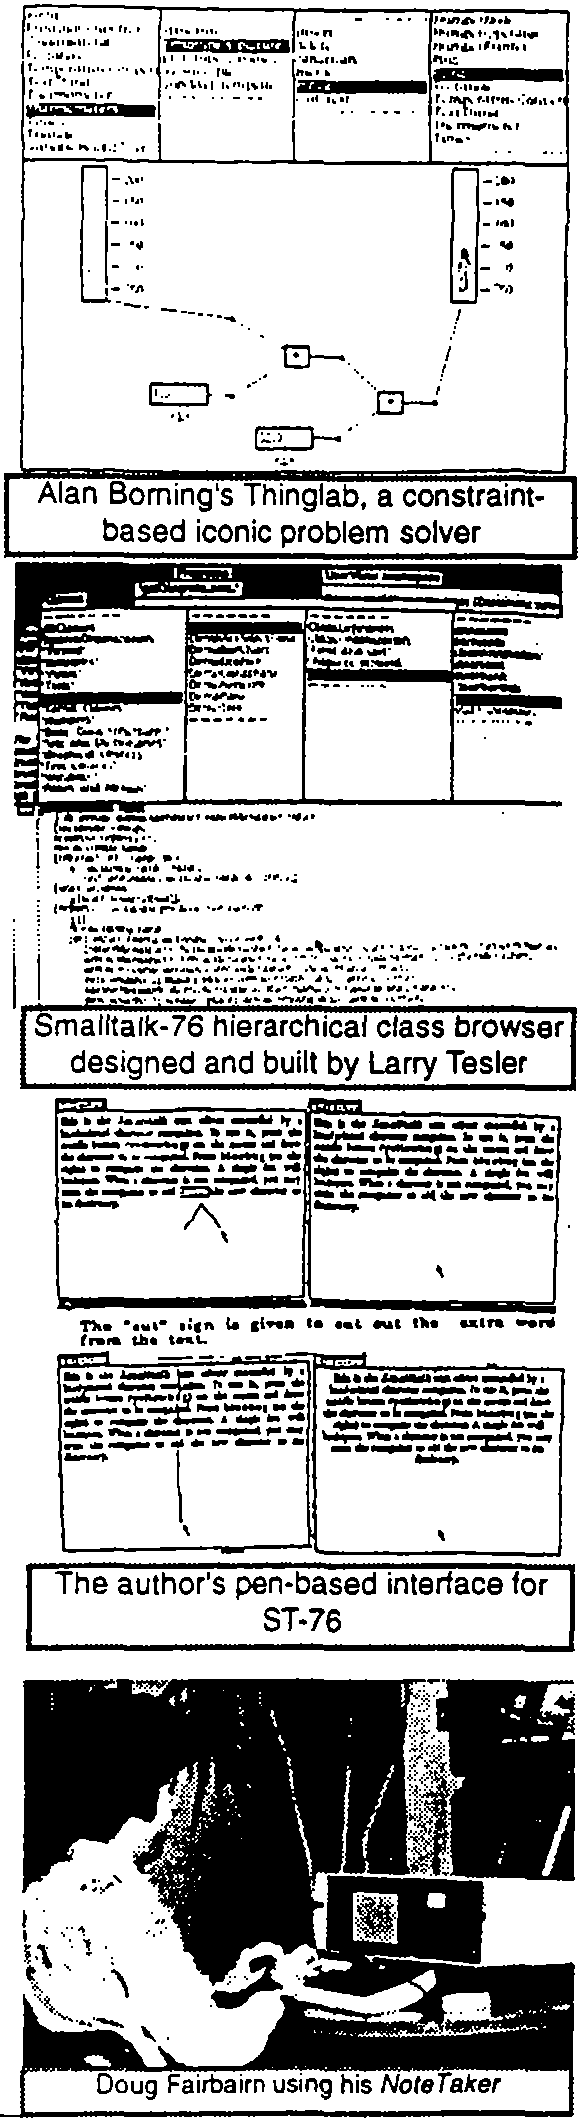 Alan Borning's Thinglab, a constraint-based iconic problem solver, Smalltalk-76 hierachical class browser designed and built by Larry Tesler, The author's pen-based interface for ST-76